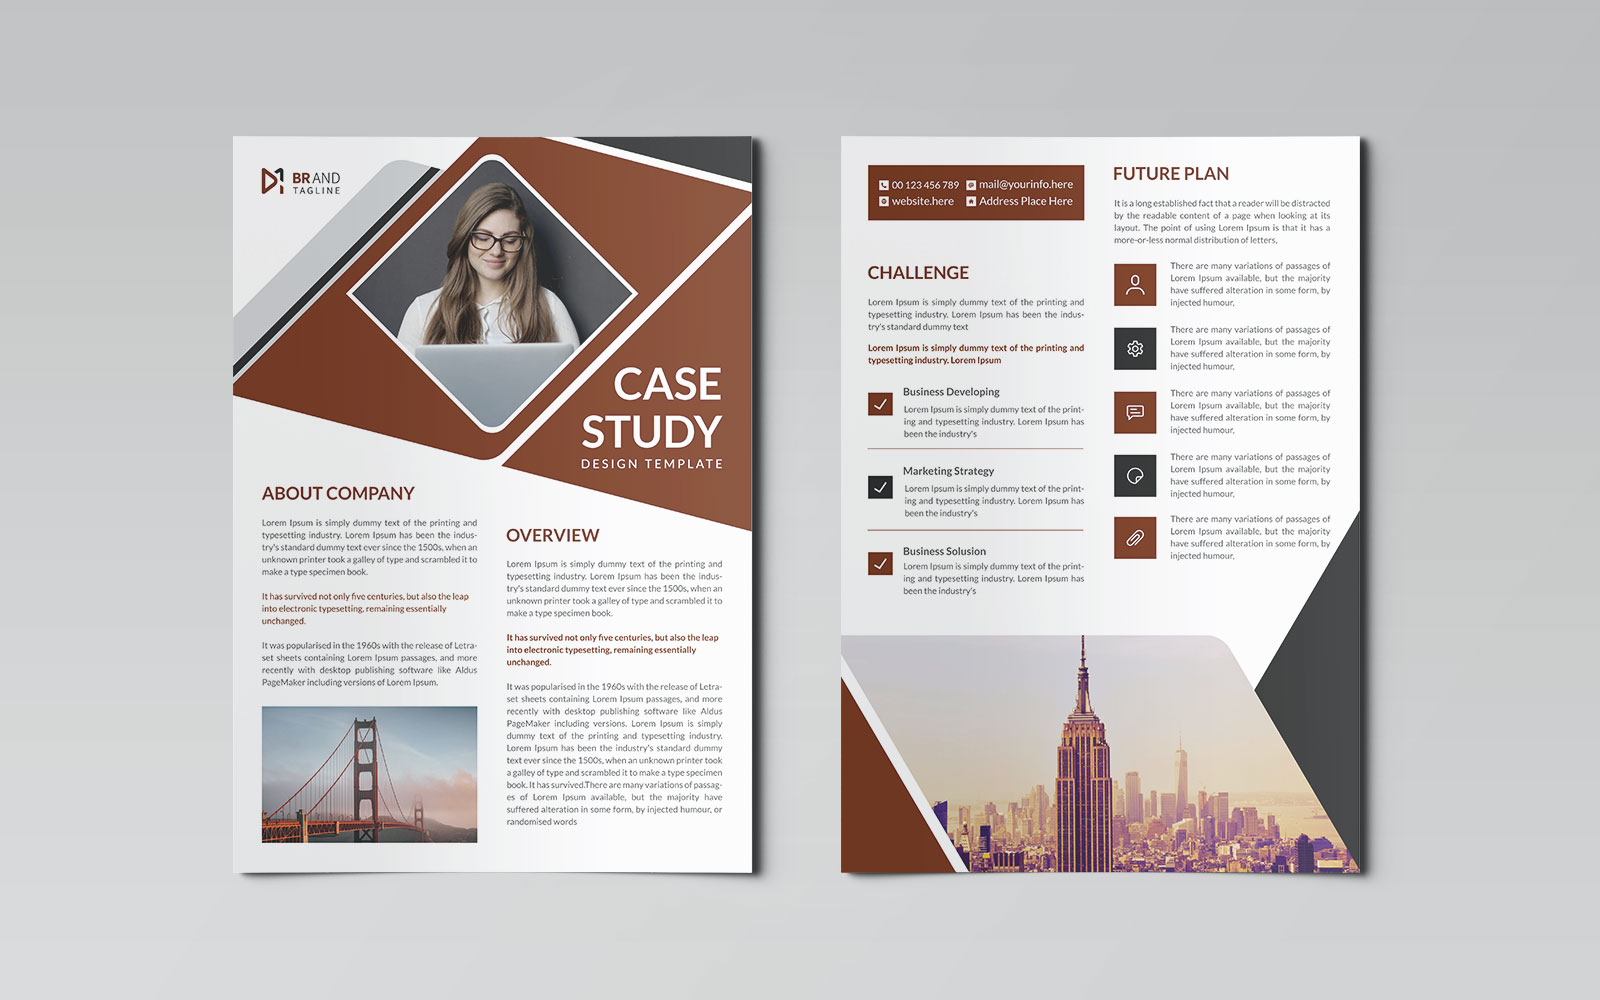 Clean and modern case study design - corporate identity